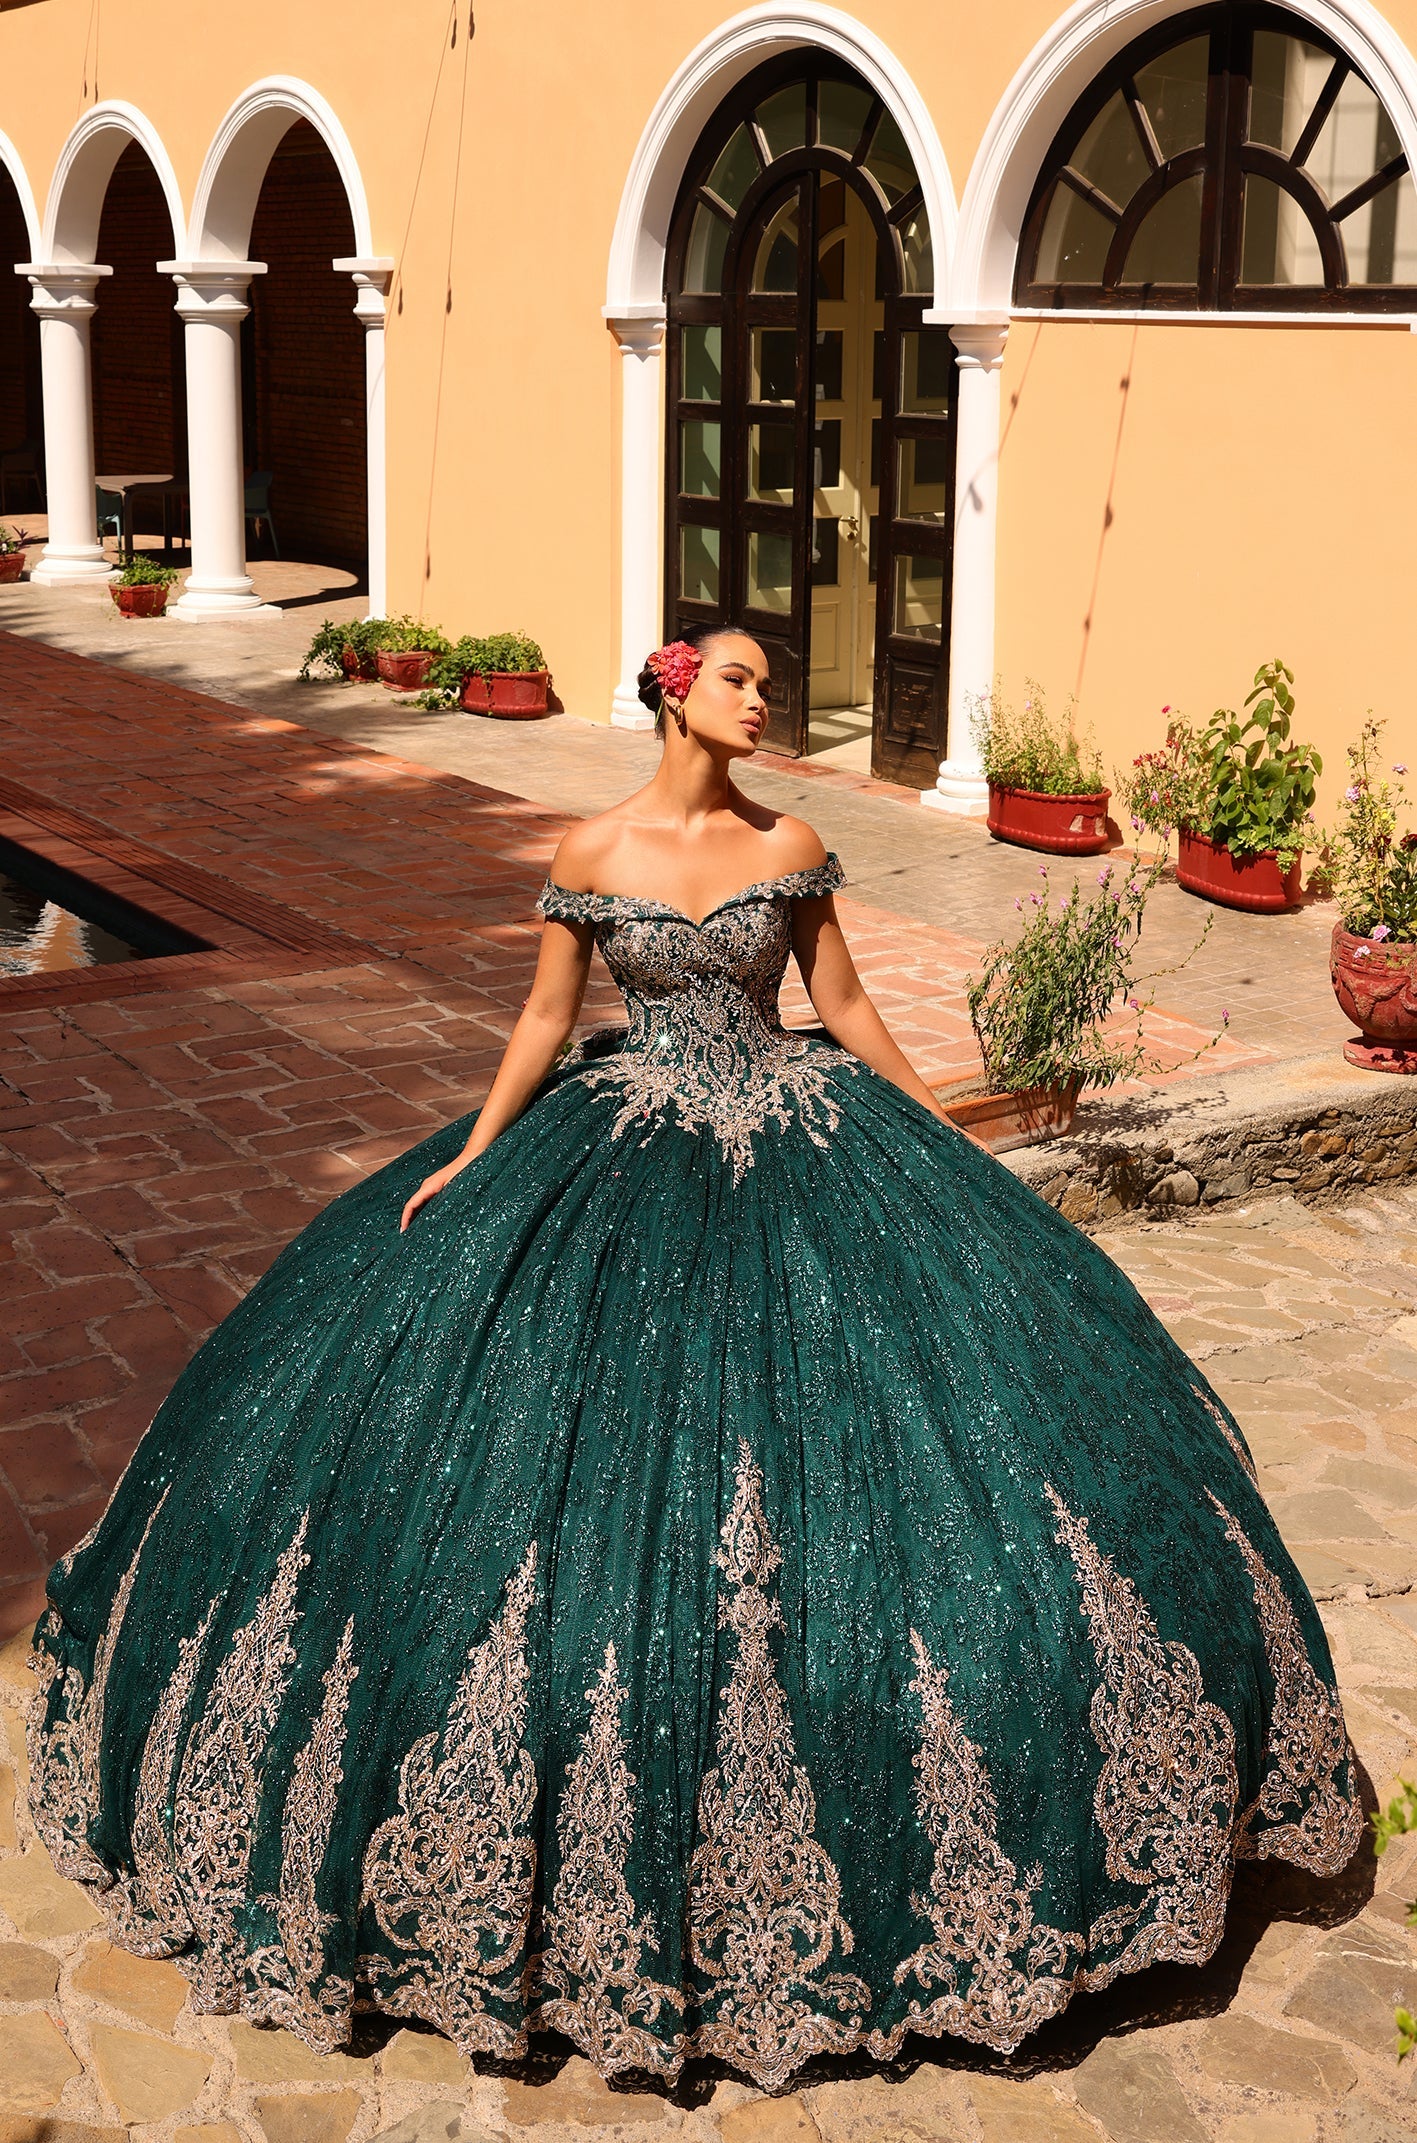 This Amarra 54324 Quinceanera Dress boasts a glittering hooded cape and off-the-shoulder corset, perfect for making a grand entrance at any party or ball. The exquisite train and bow detail add an extra touch of elegance to this stunning gown. Elevate your style with this eye-catching dress.